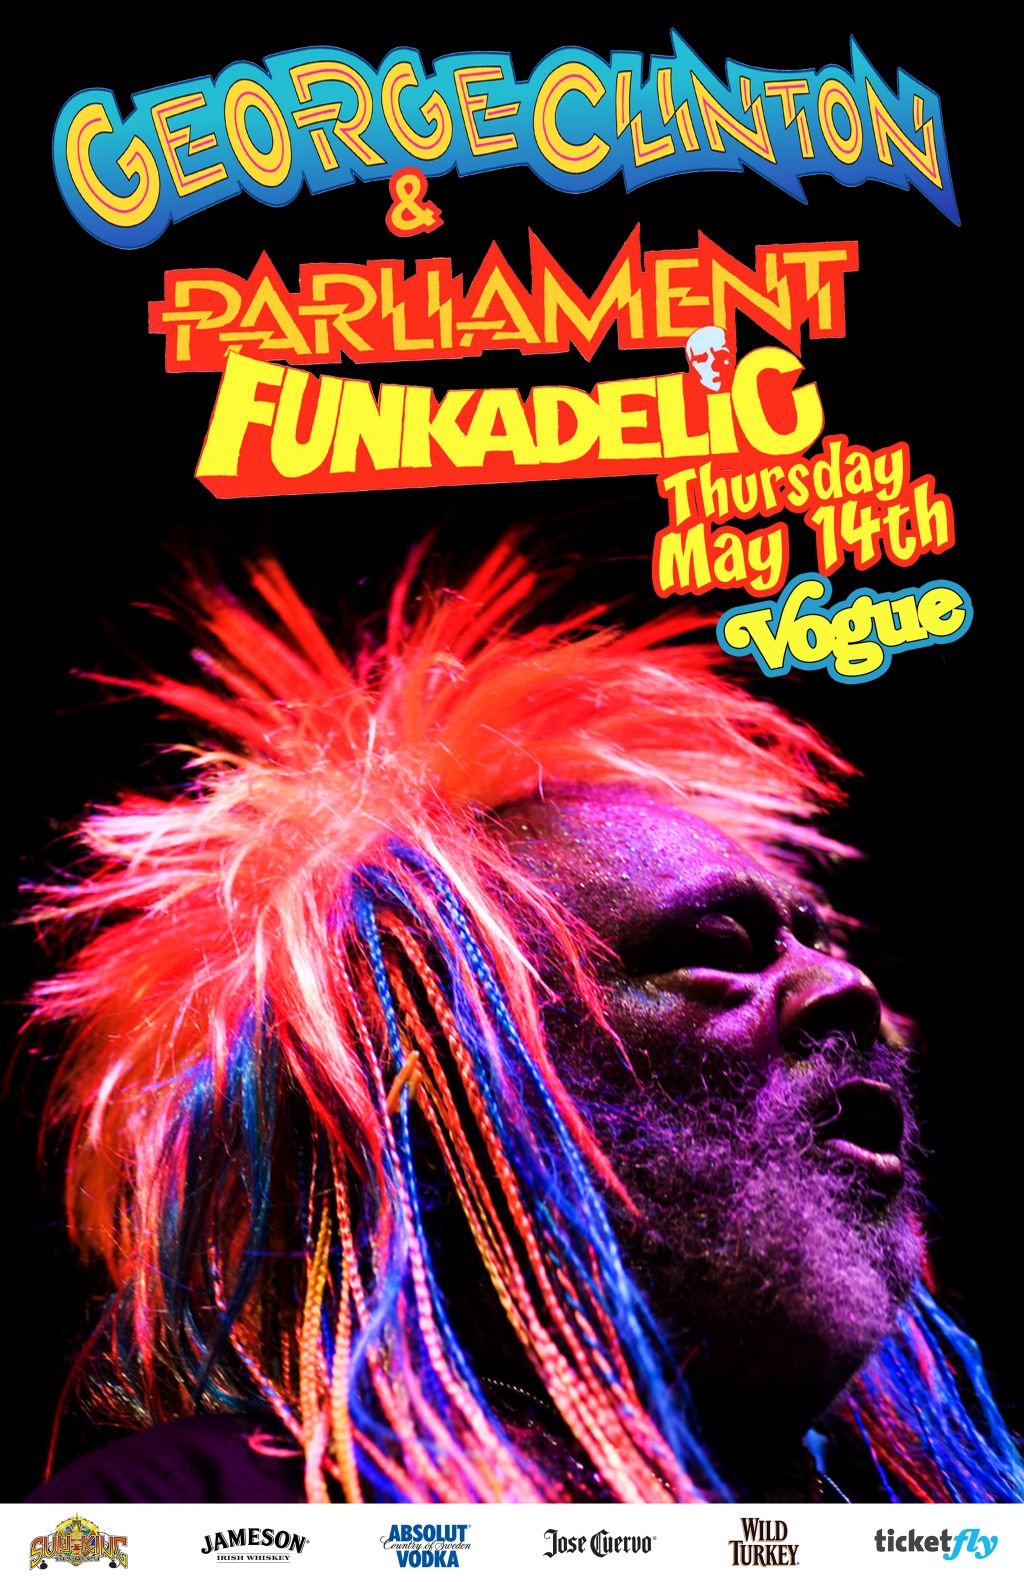 George Clinton & Parliament Funkadelic at The Vogue